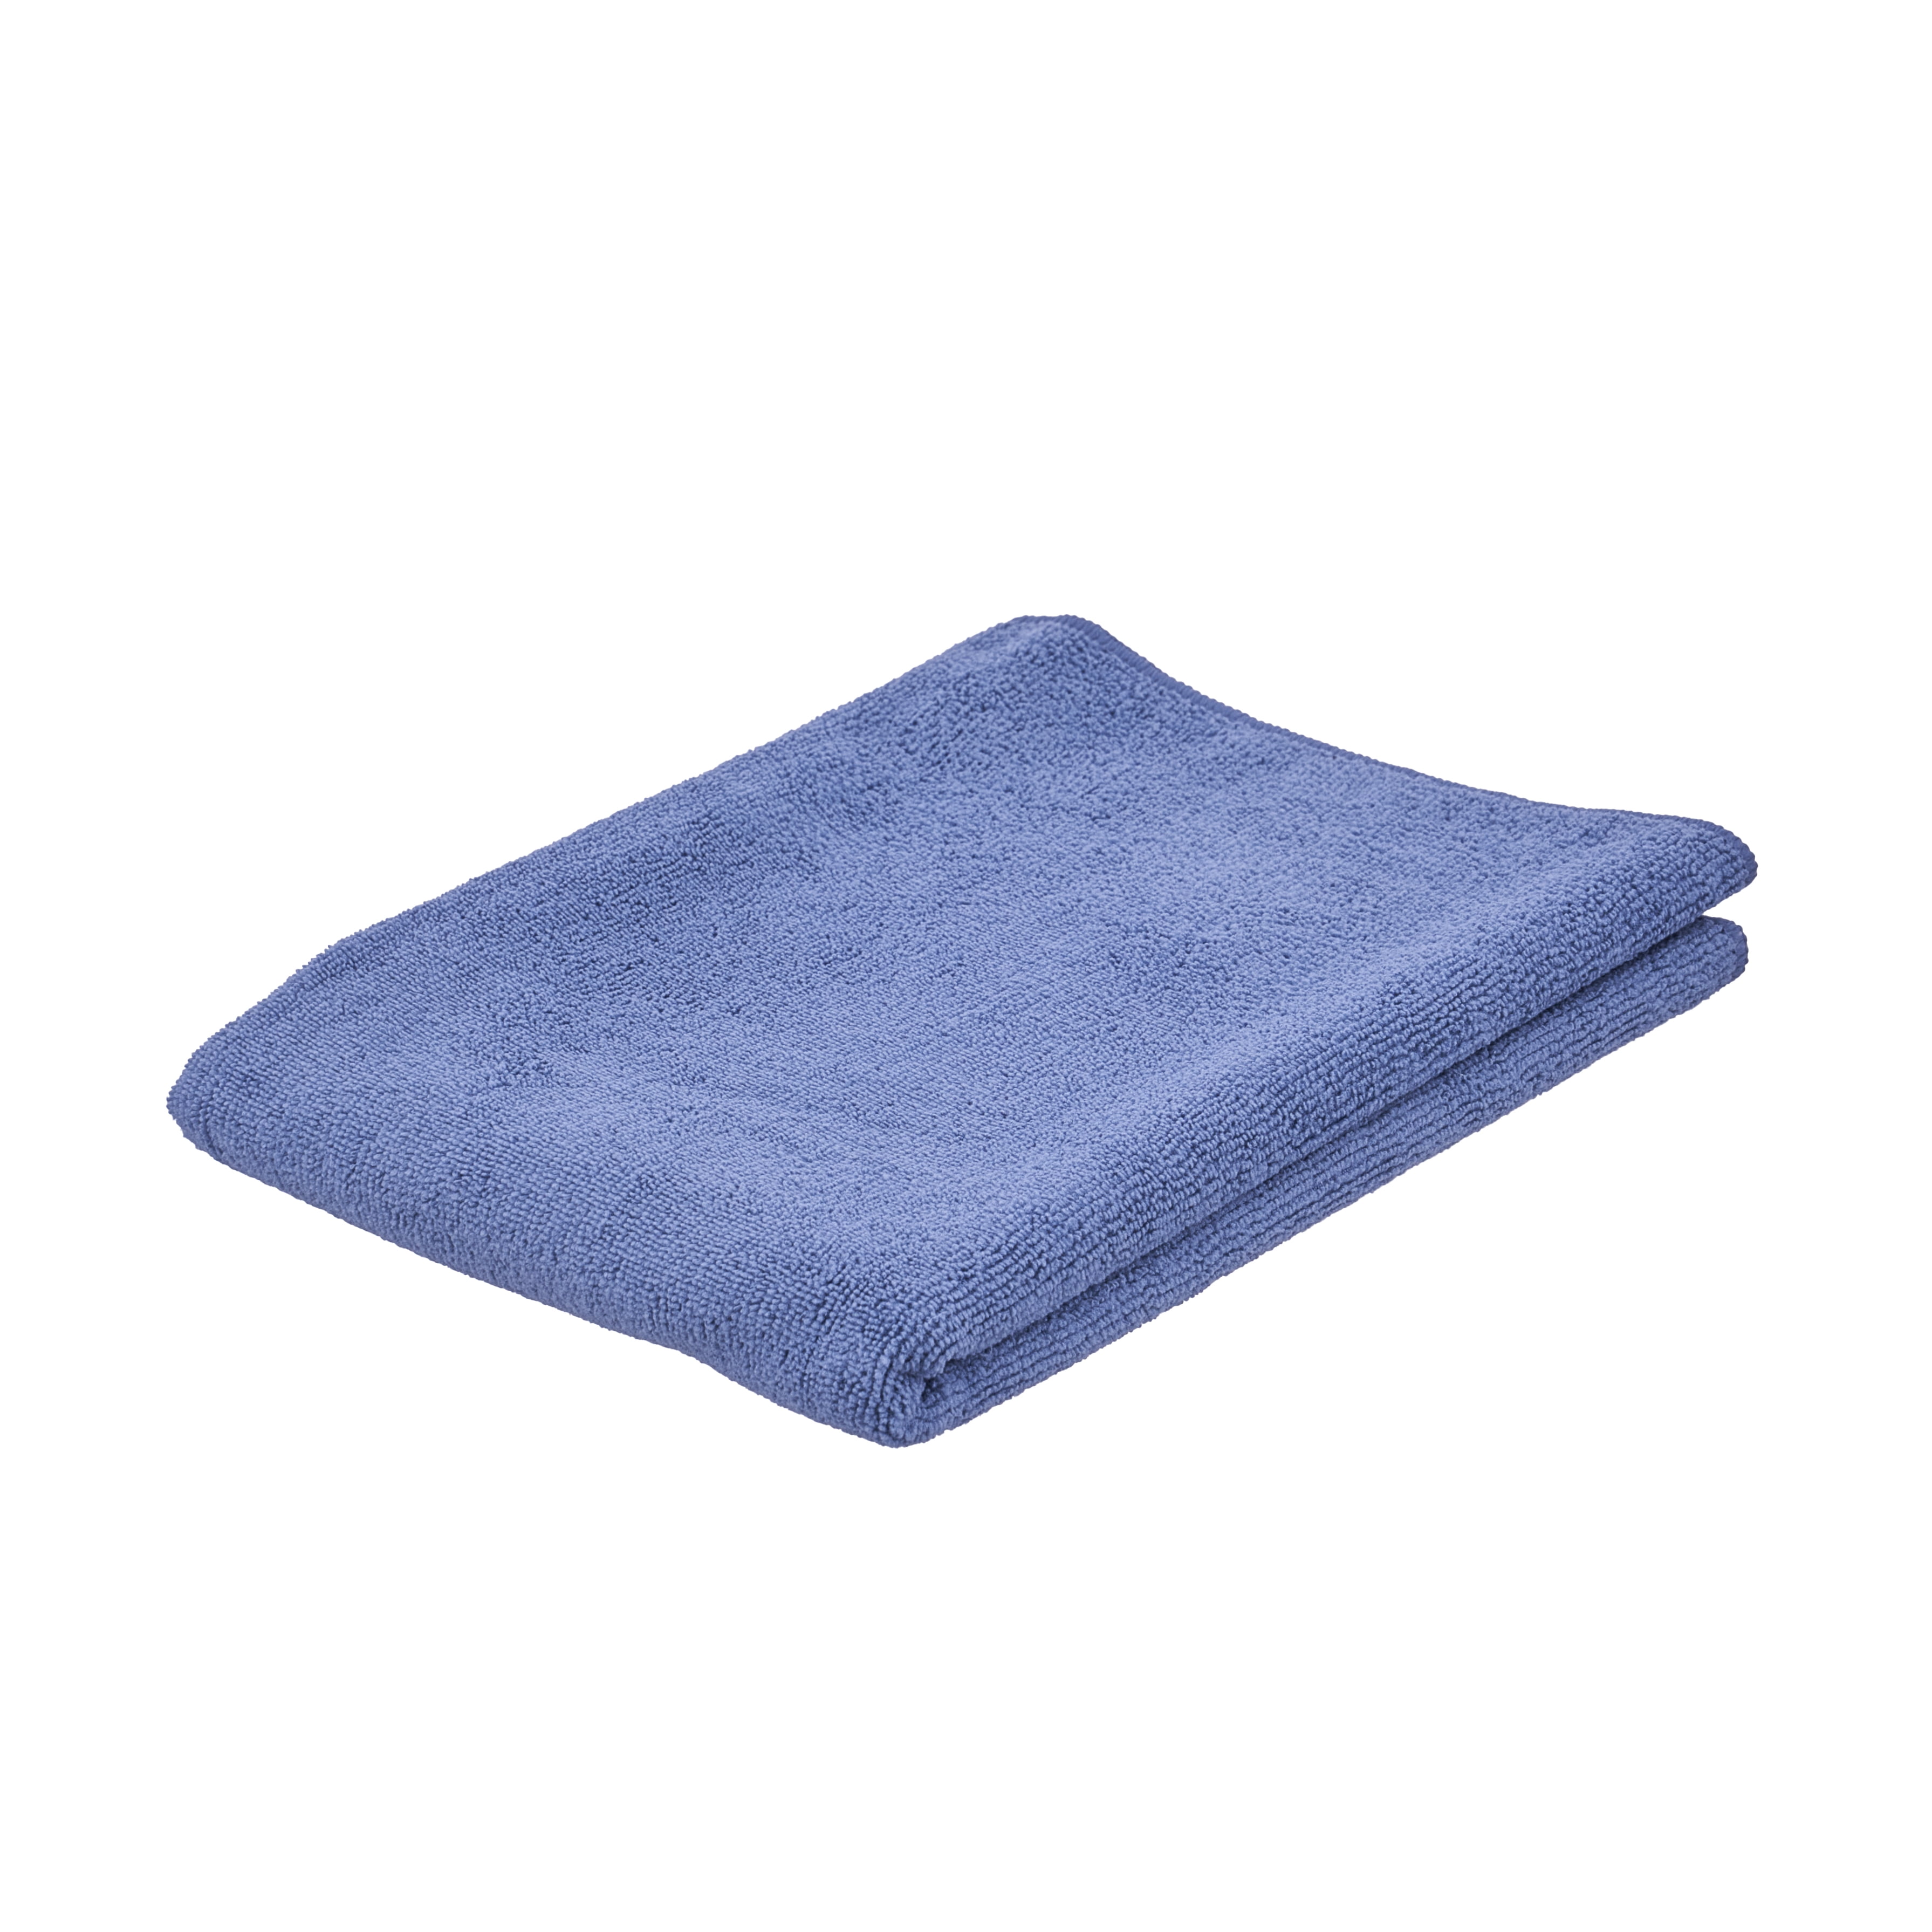 Great Value Pull & Clean Microfiber All-purpose Cleaning Towels